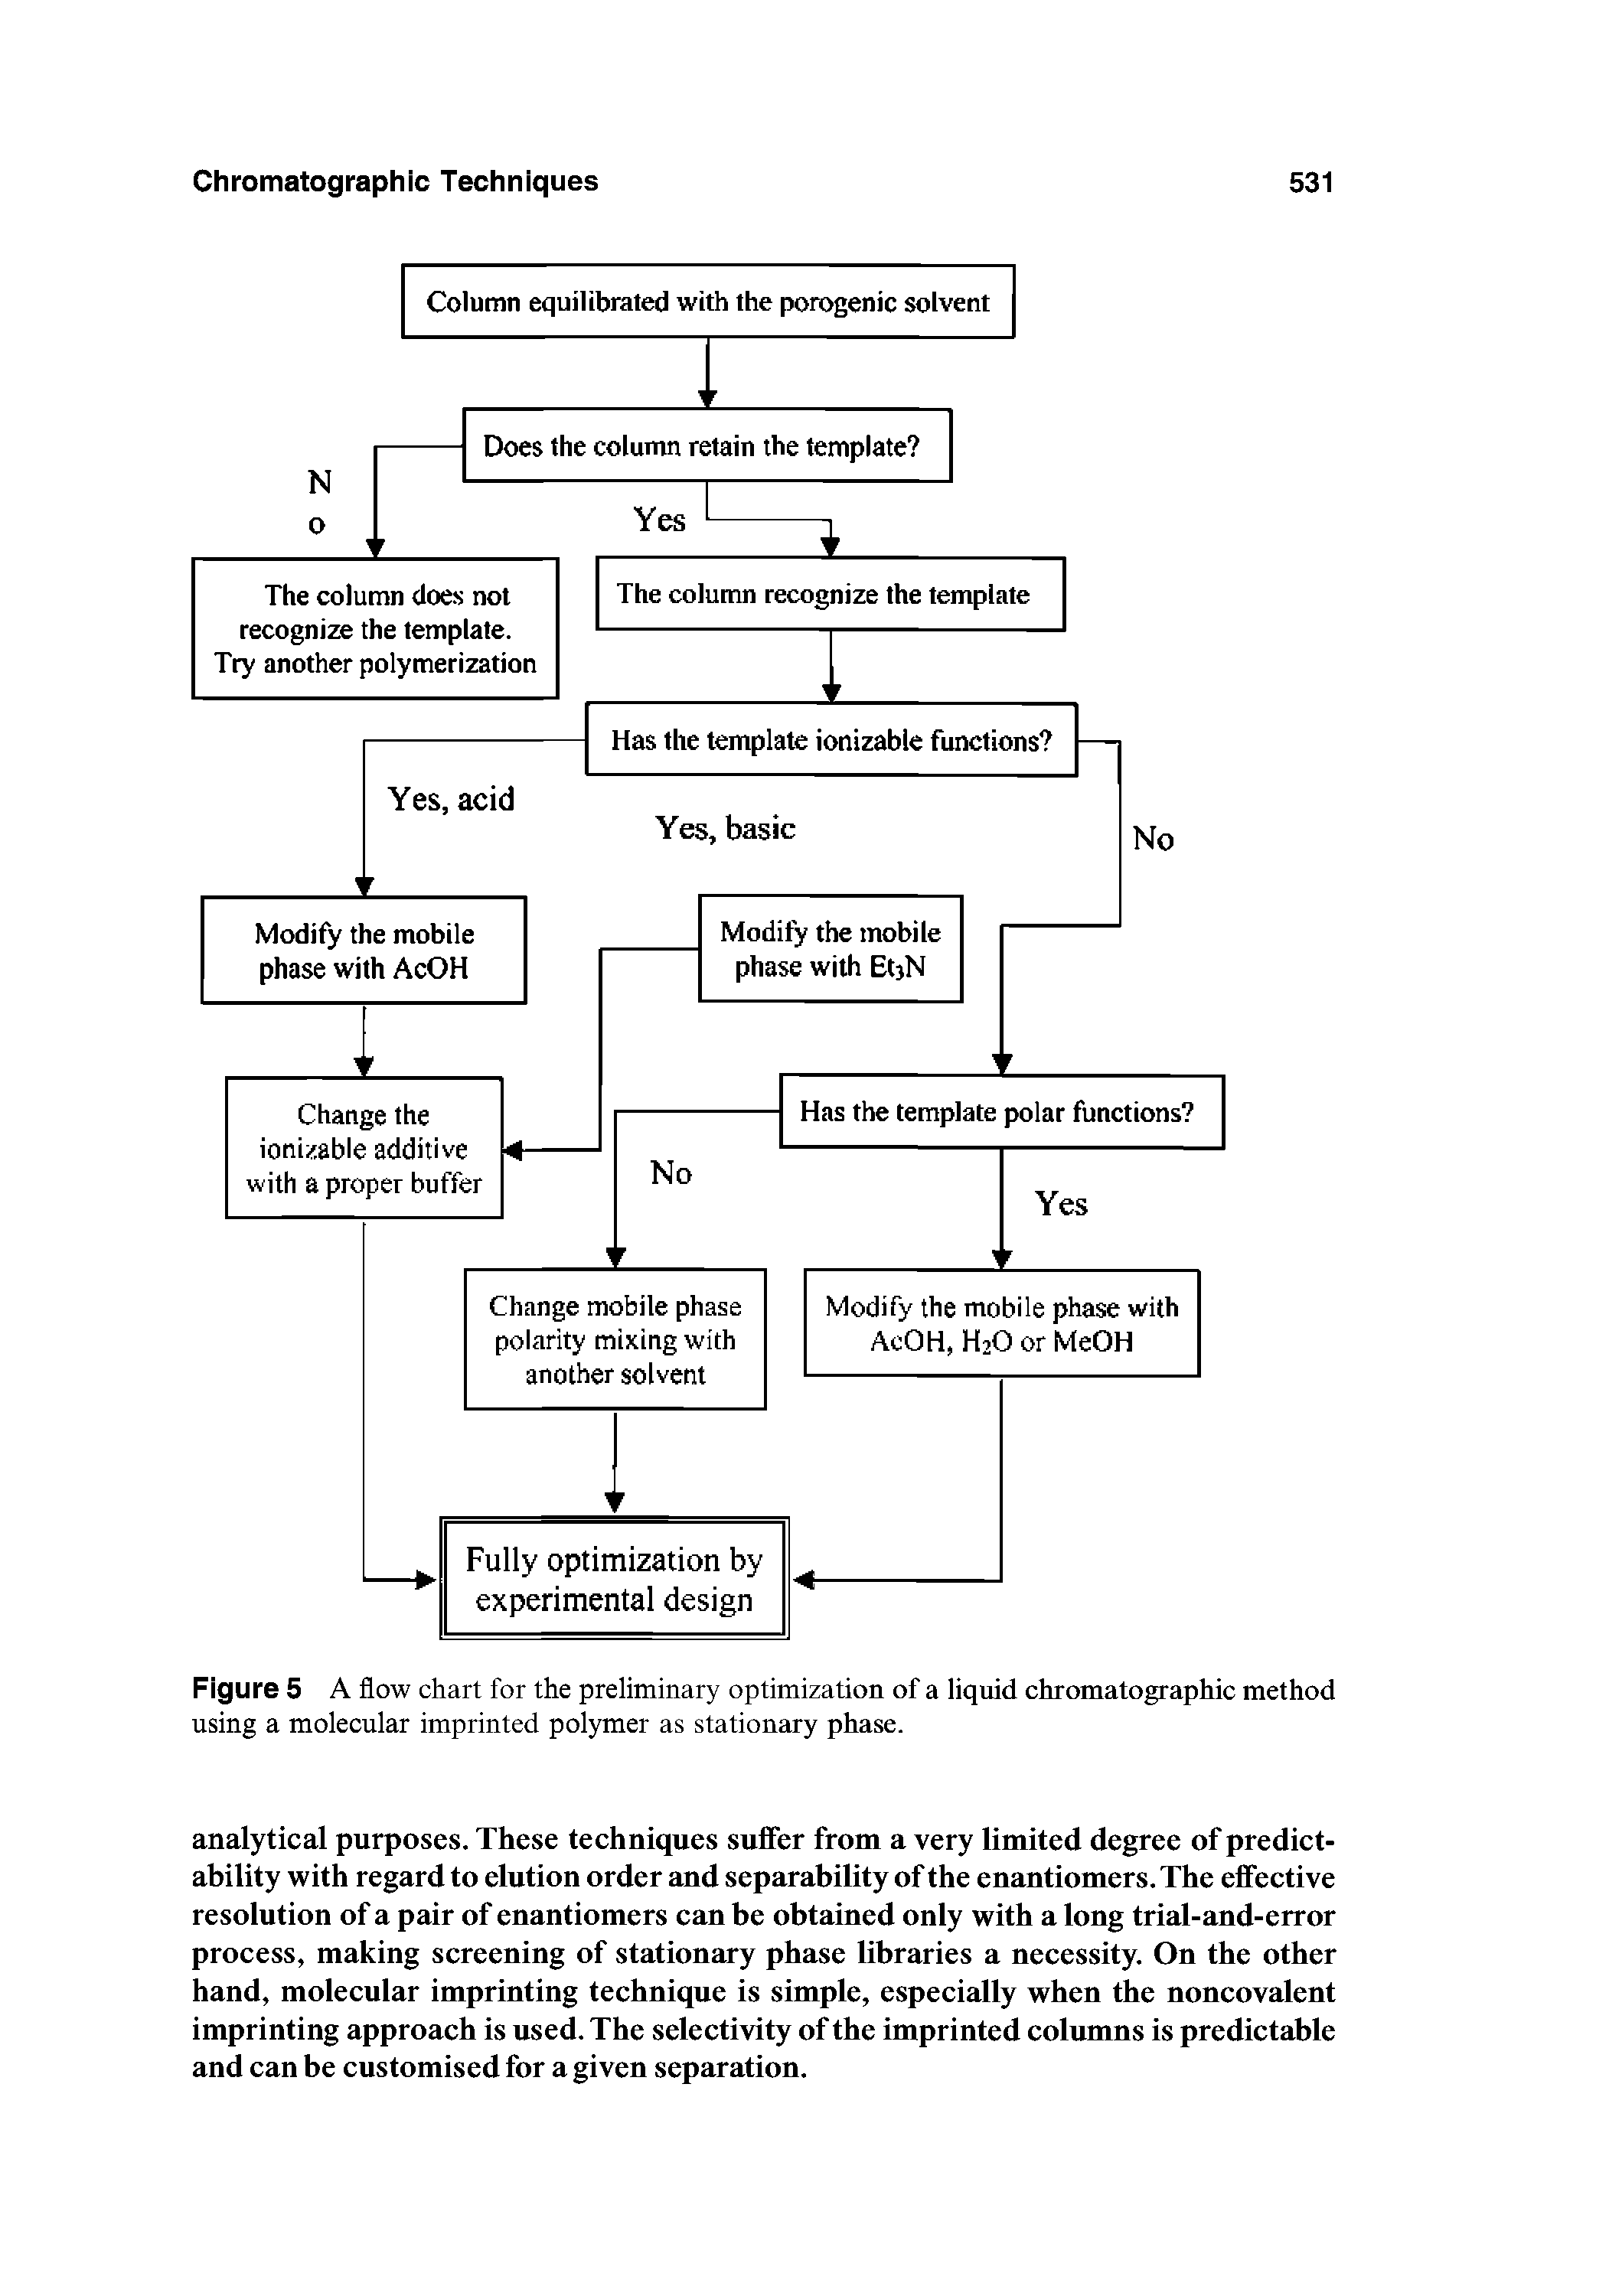 Figure 5 A flow chart for the preliminary optimization of a liquid chromatographic method using a molecular imprinted polymer as stationary phase.